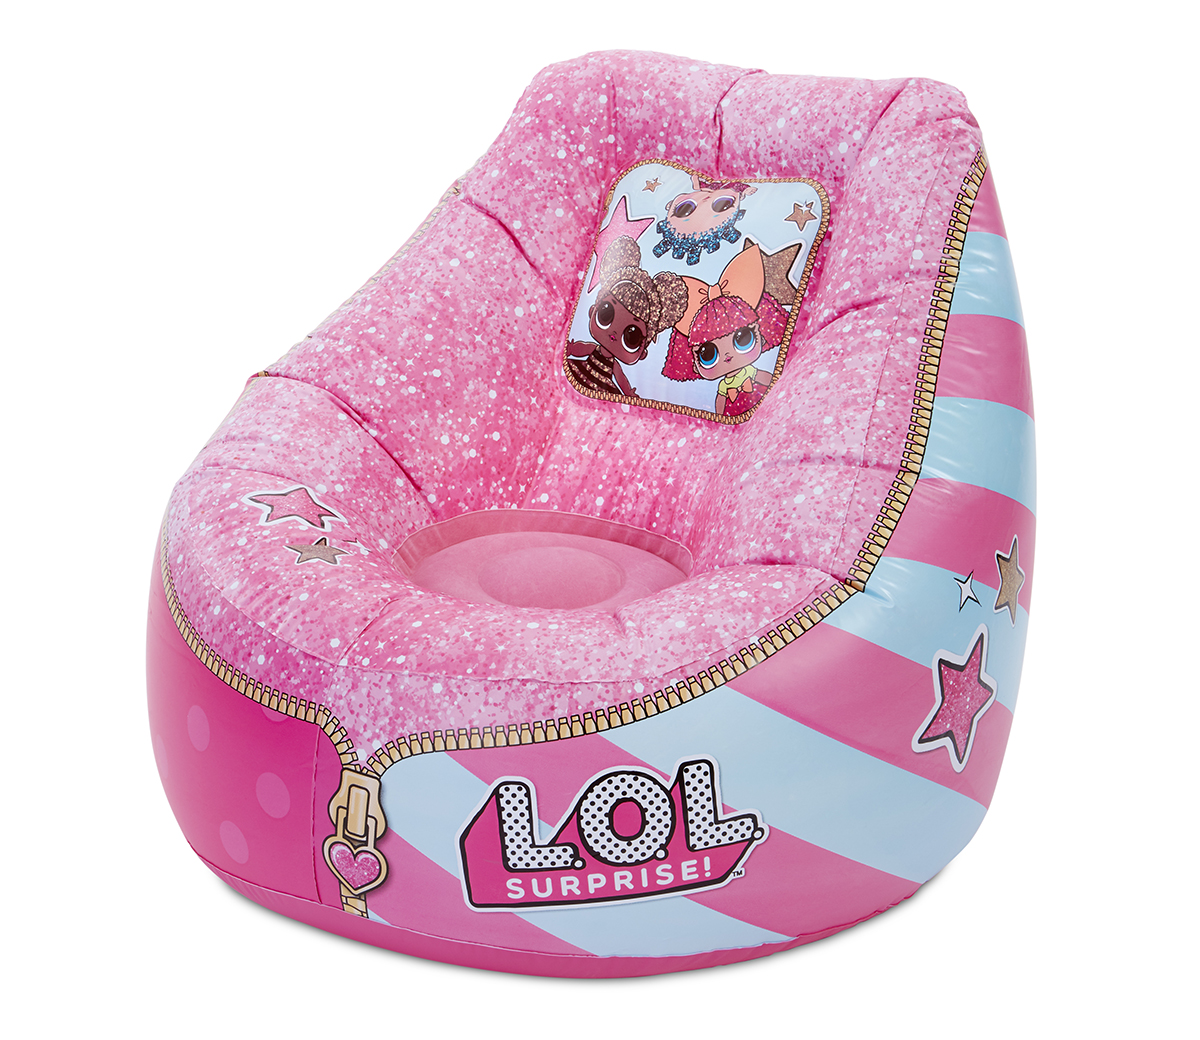 lol surprise doll chair